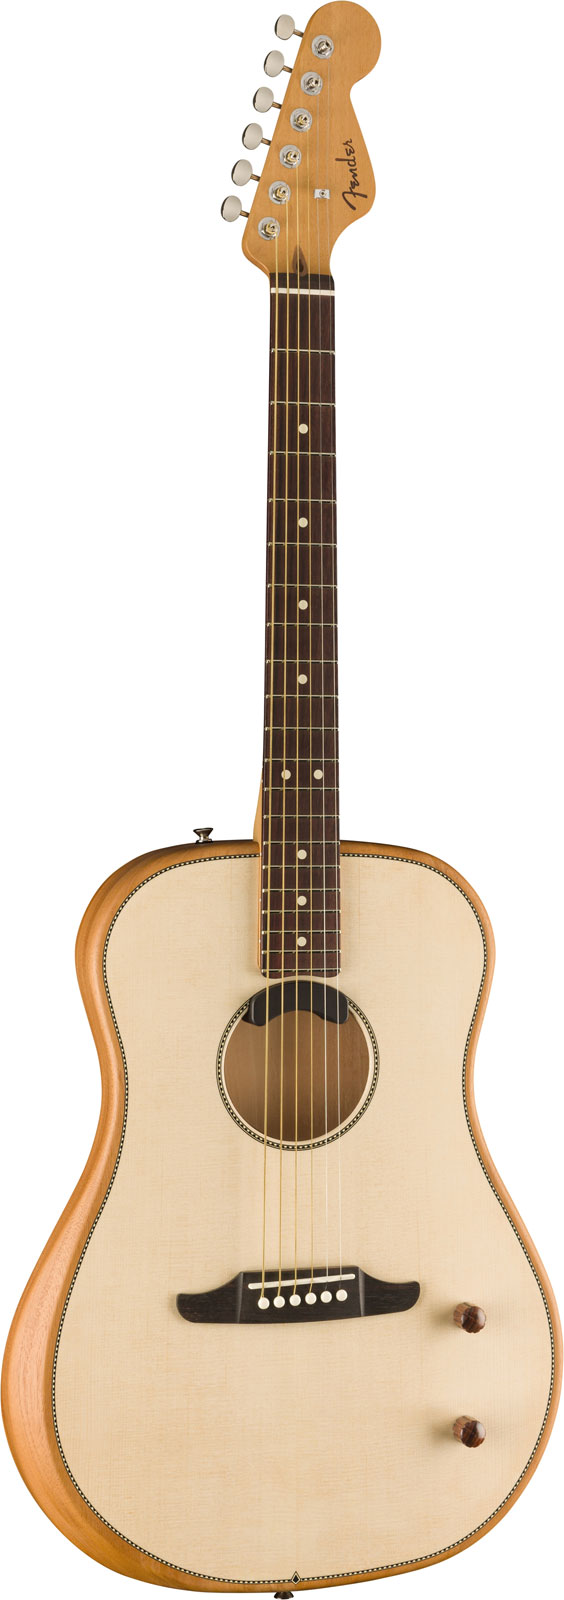 FENDER HIGHWAY SERIES DREADNOUGHT RW NATURAL